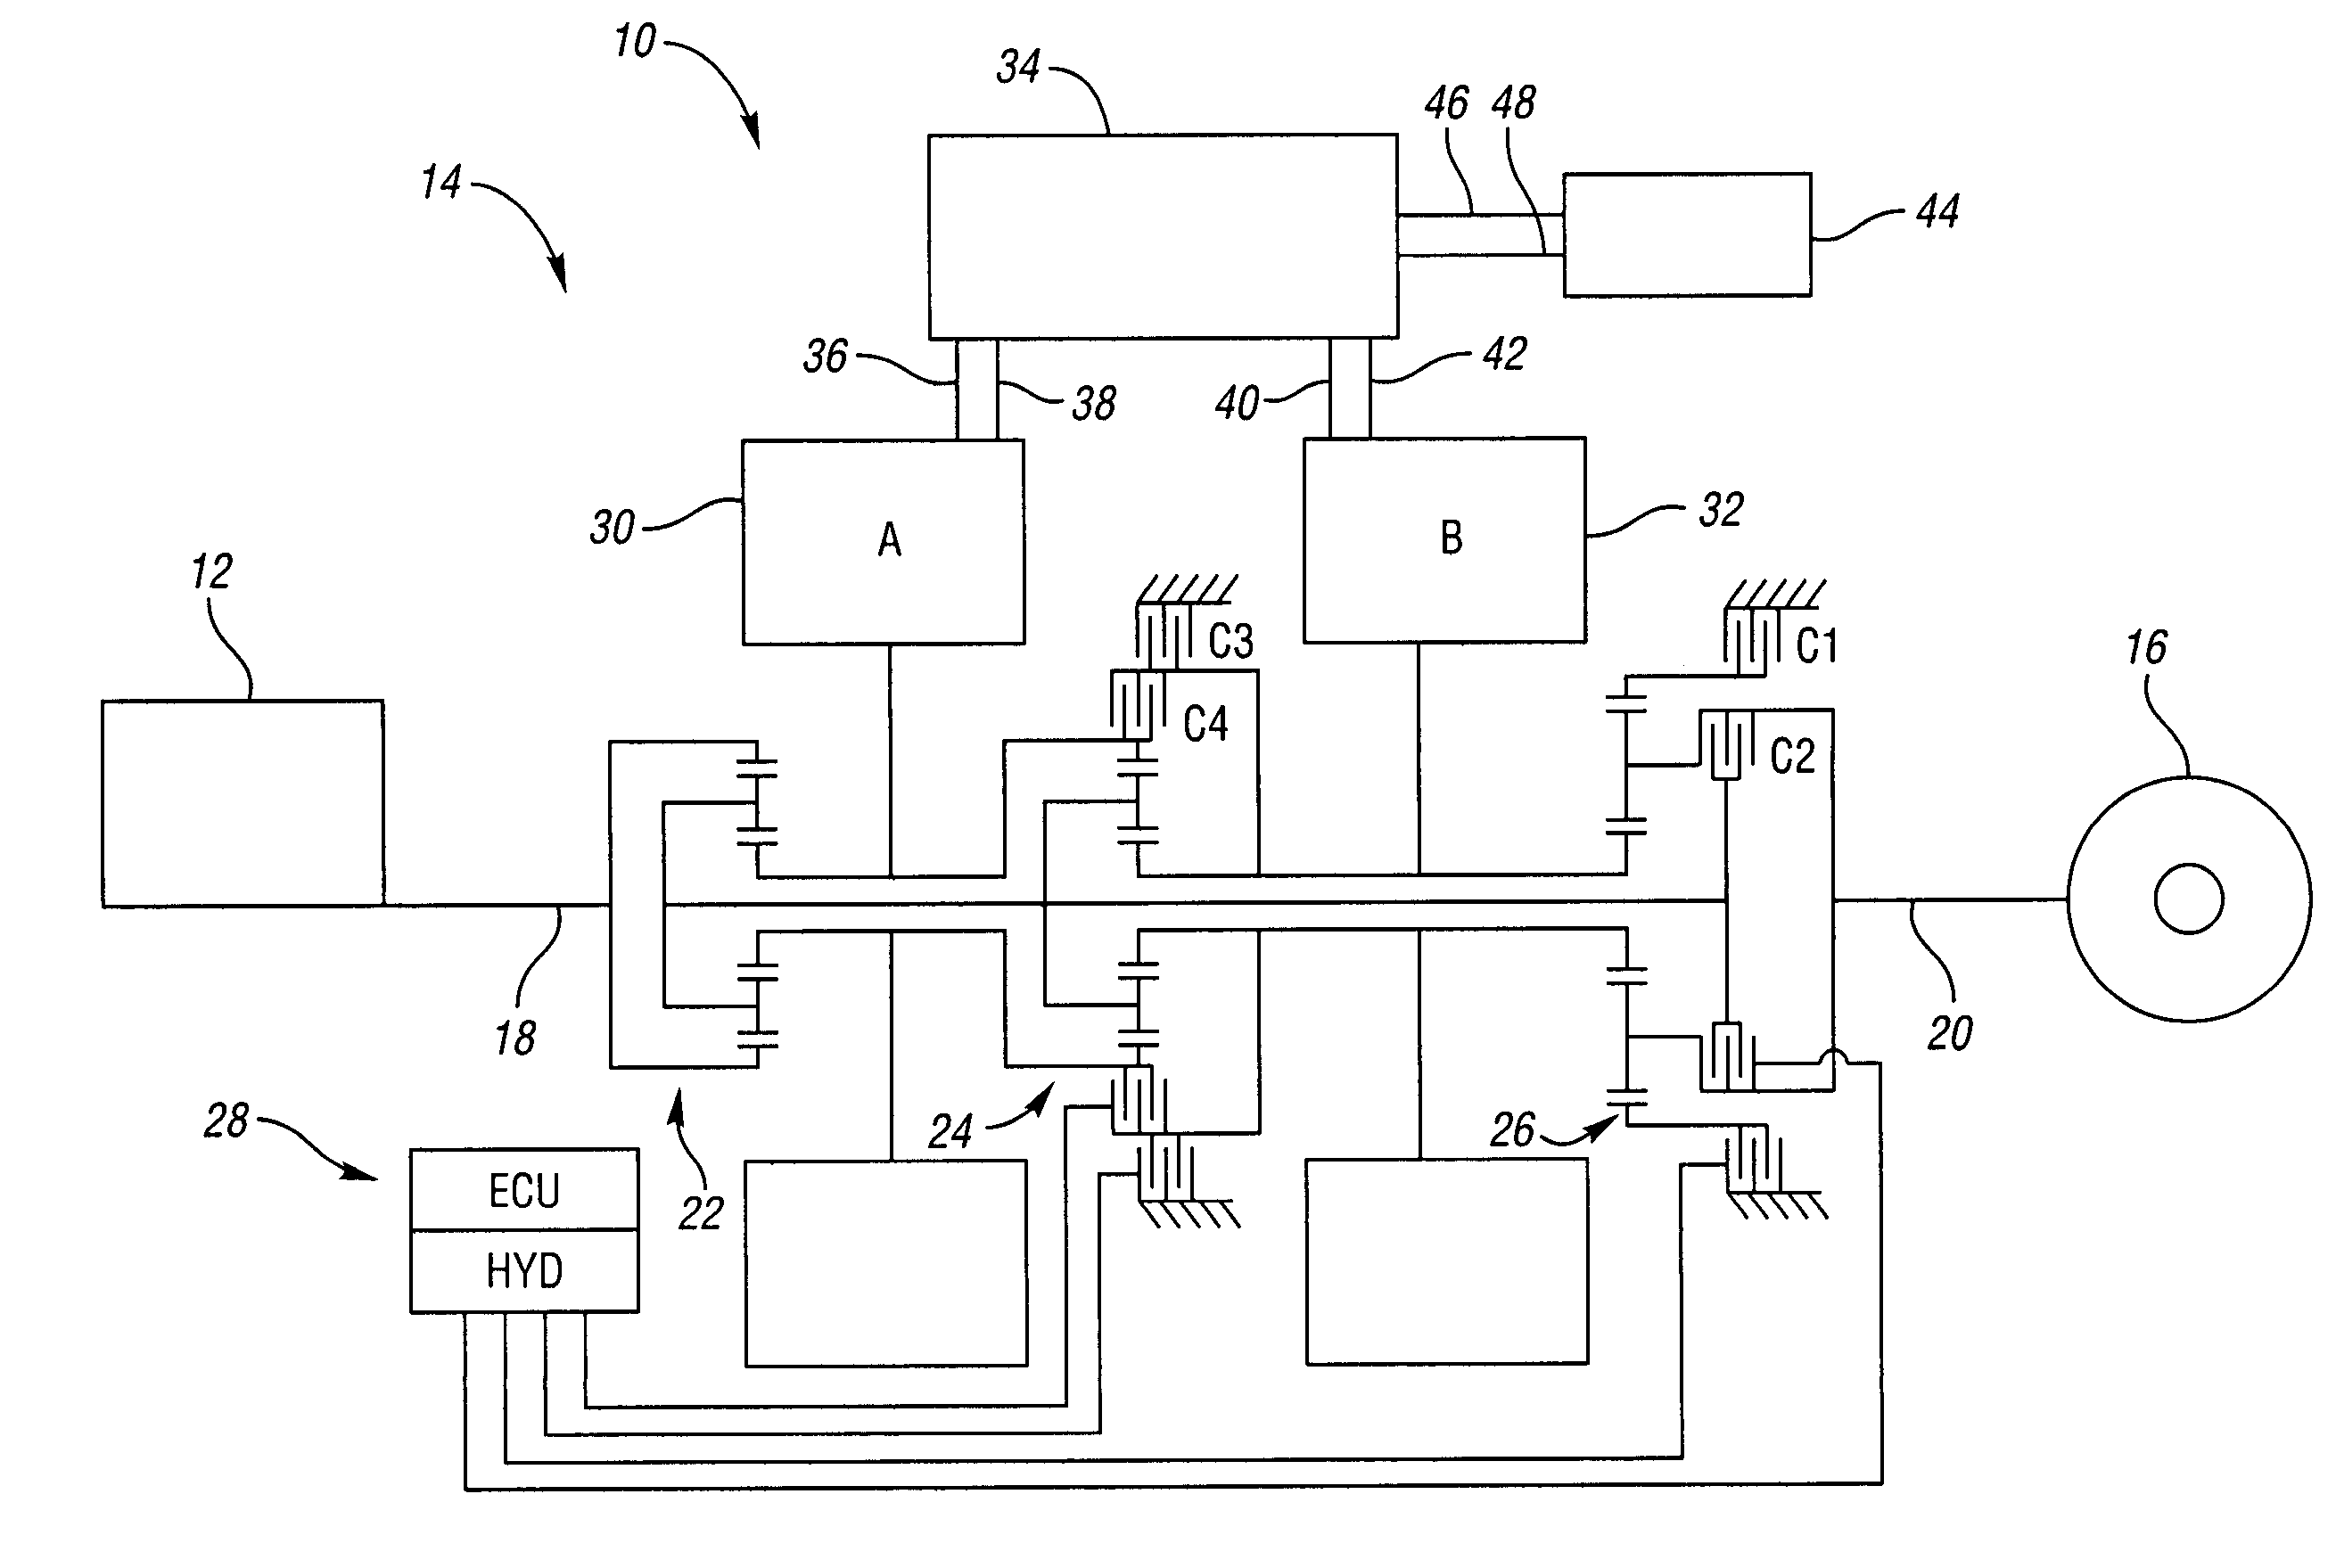 Multiplexed pressure switch system for an electrically variable hybrid transmission